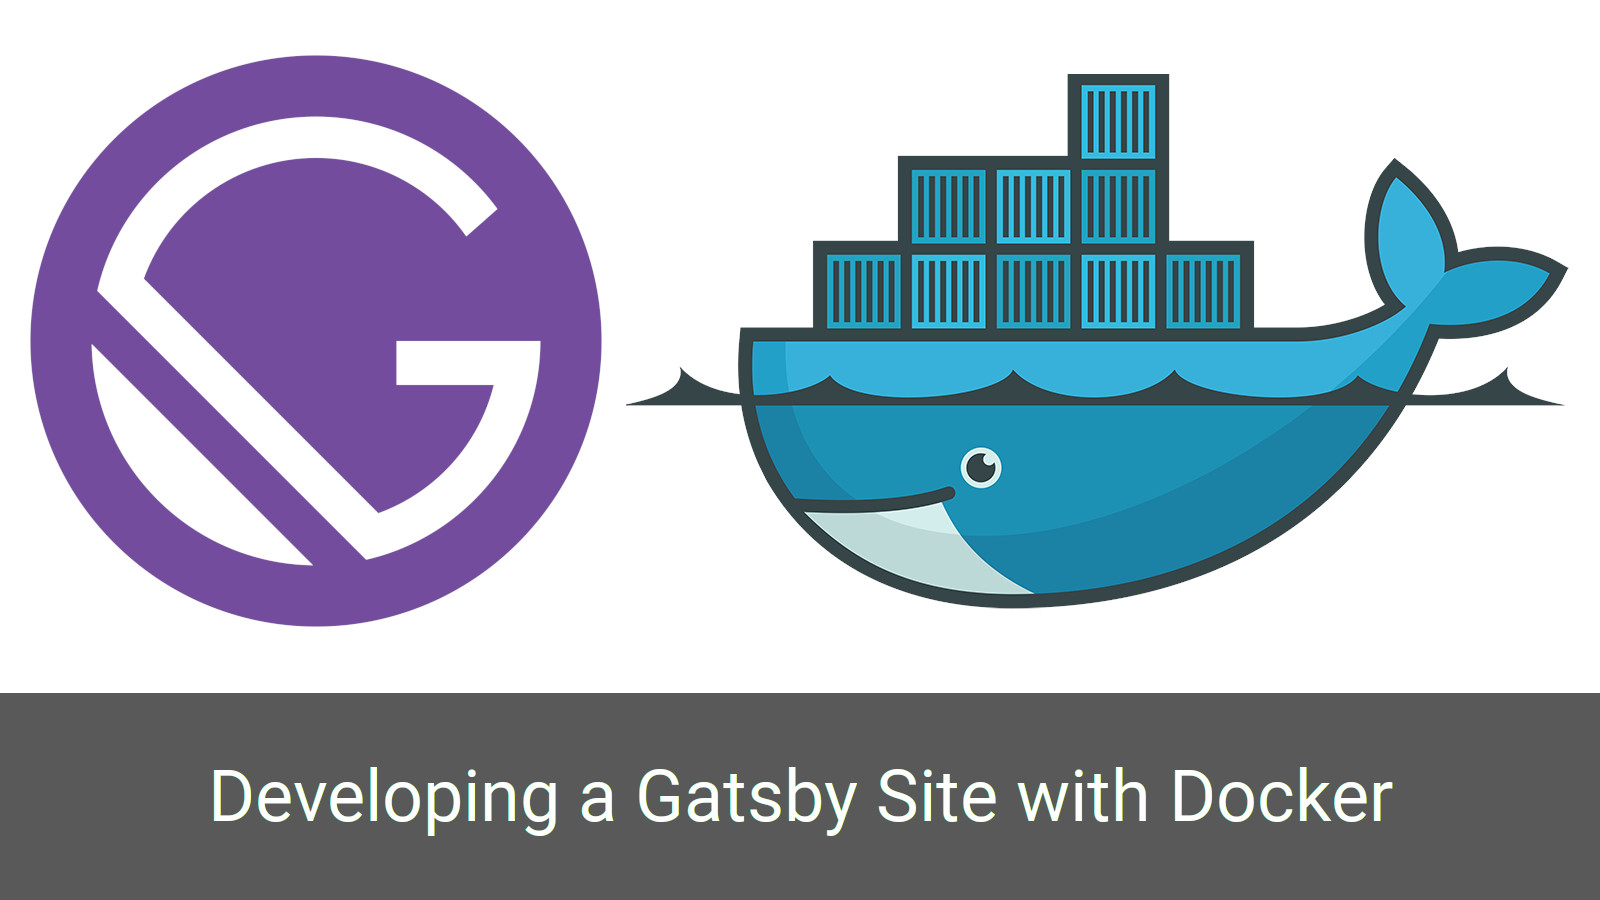 Developing a Gatsby Site with Docker